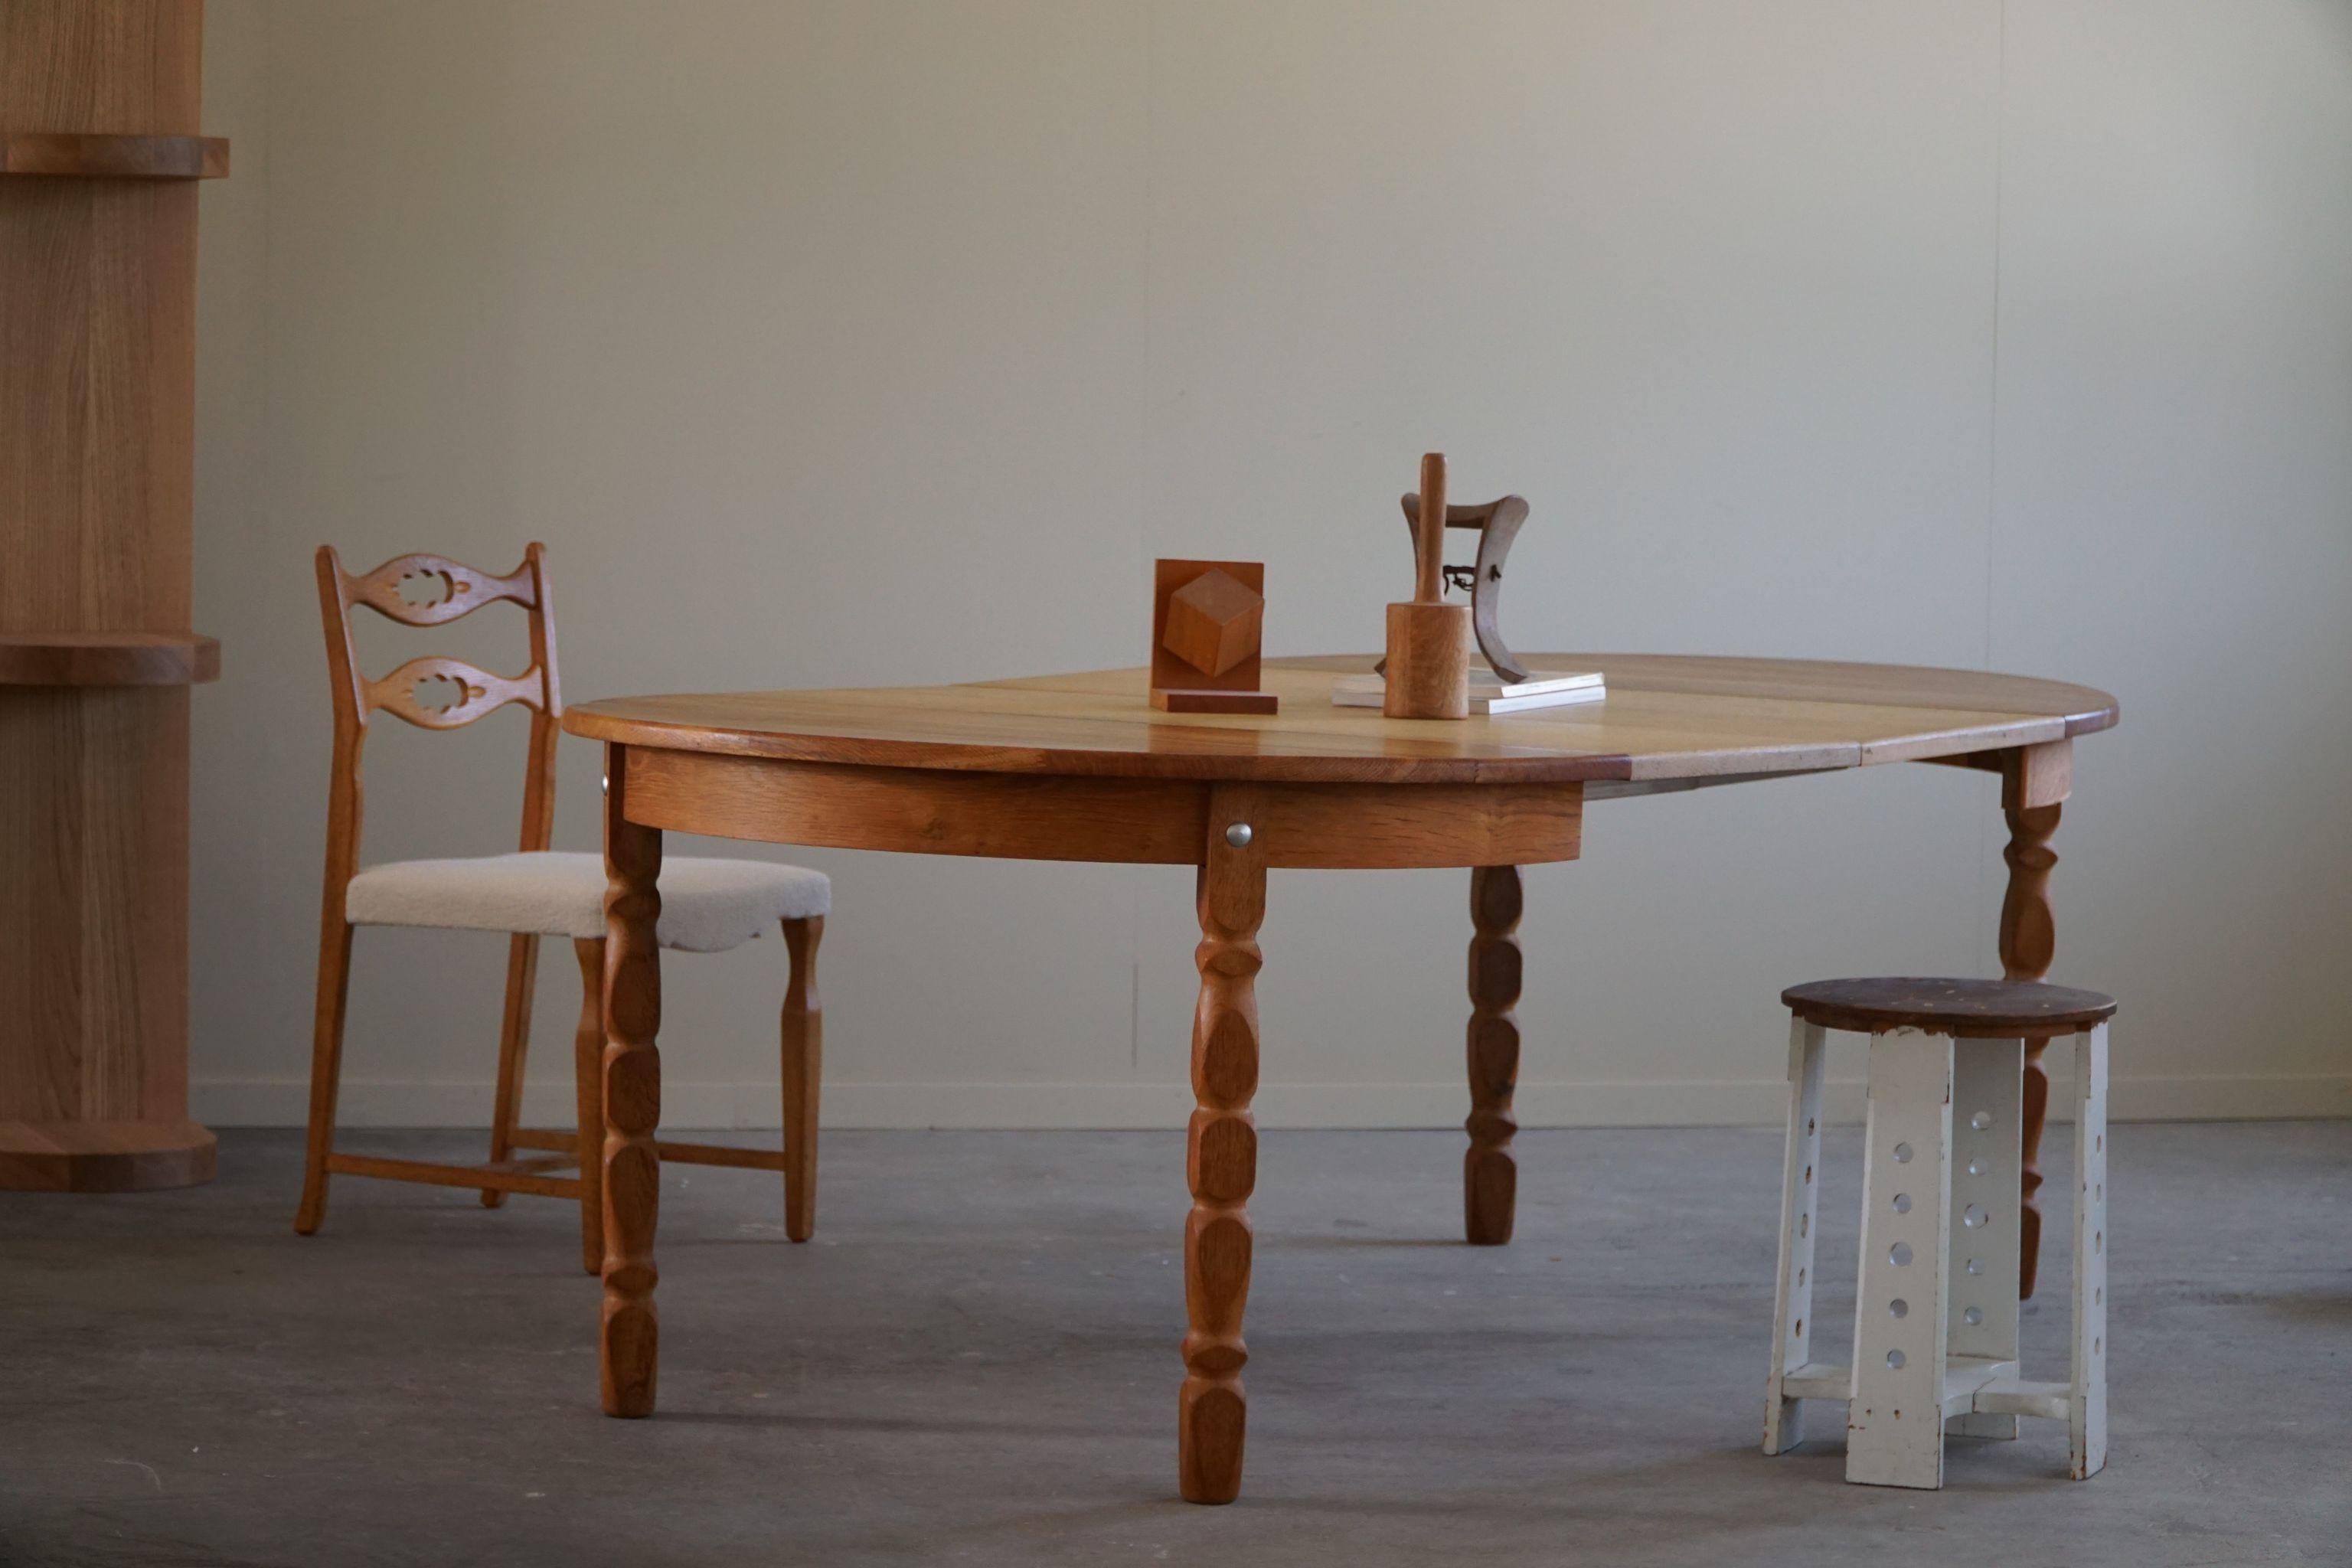 20th Century Mid-Century Danish Round Dining Table in Solid Oak with Two Extensions, 1960s For Sale